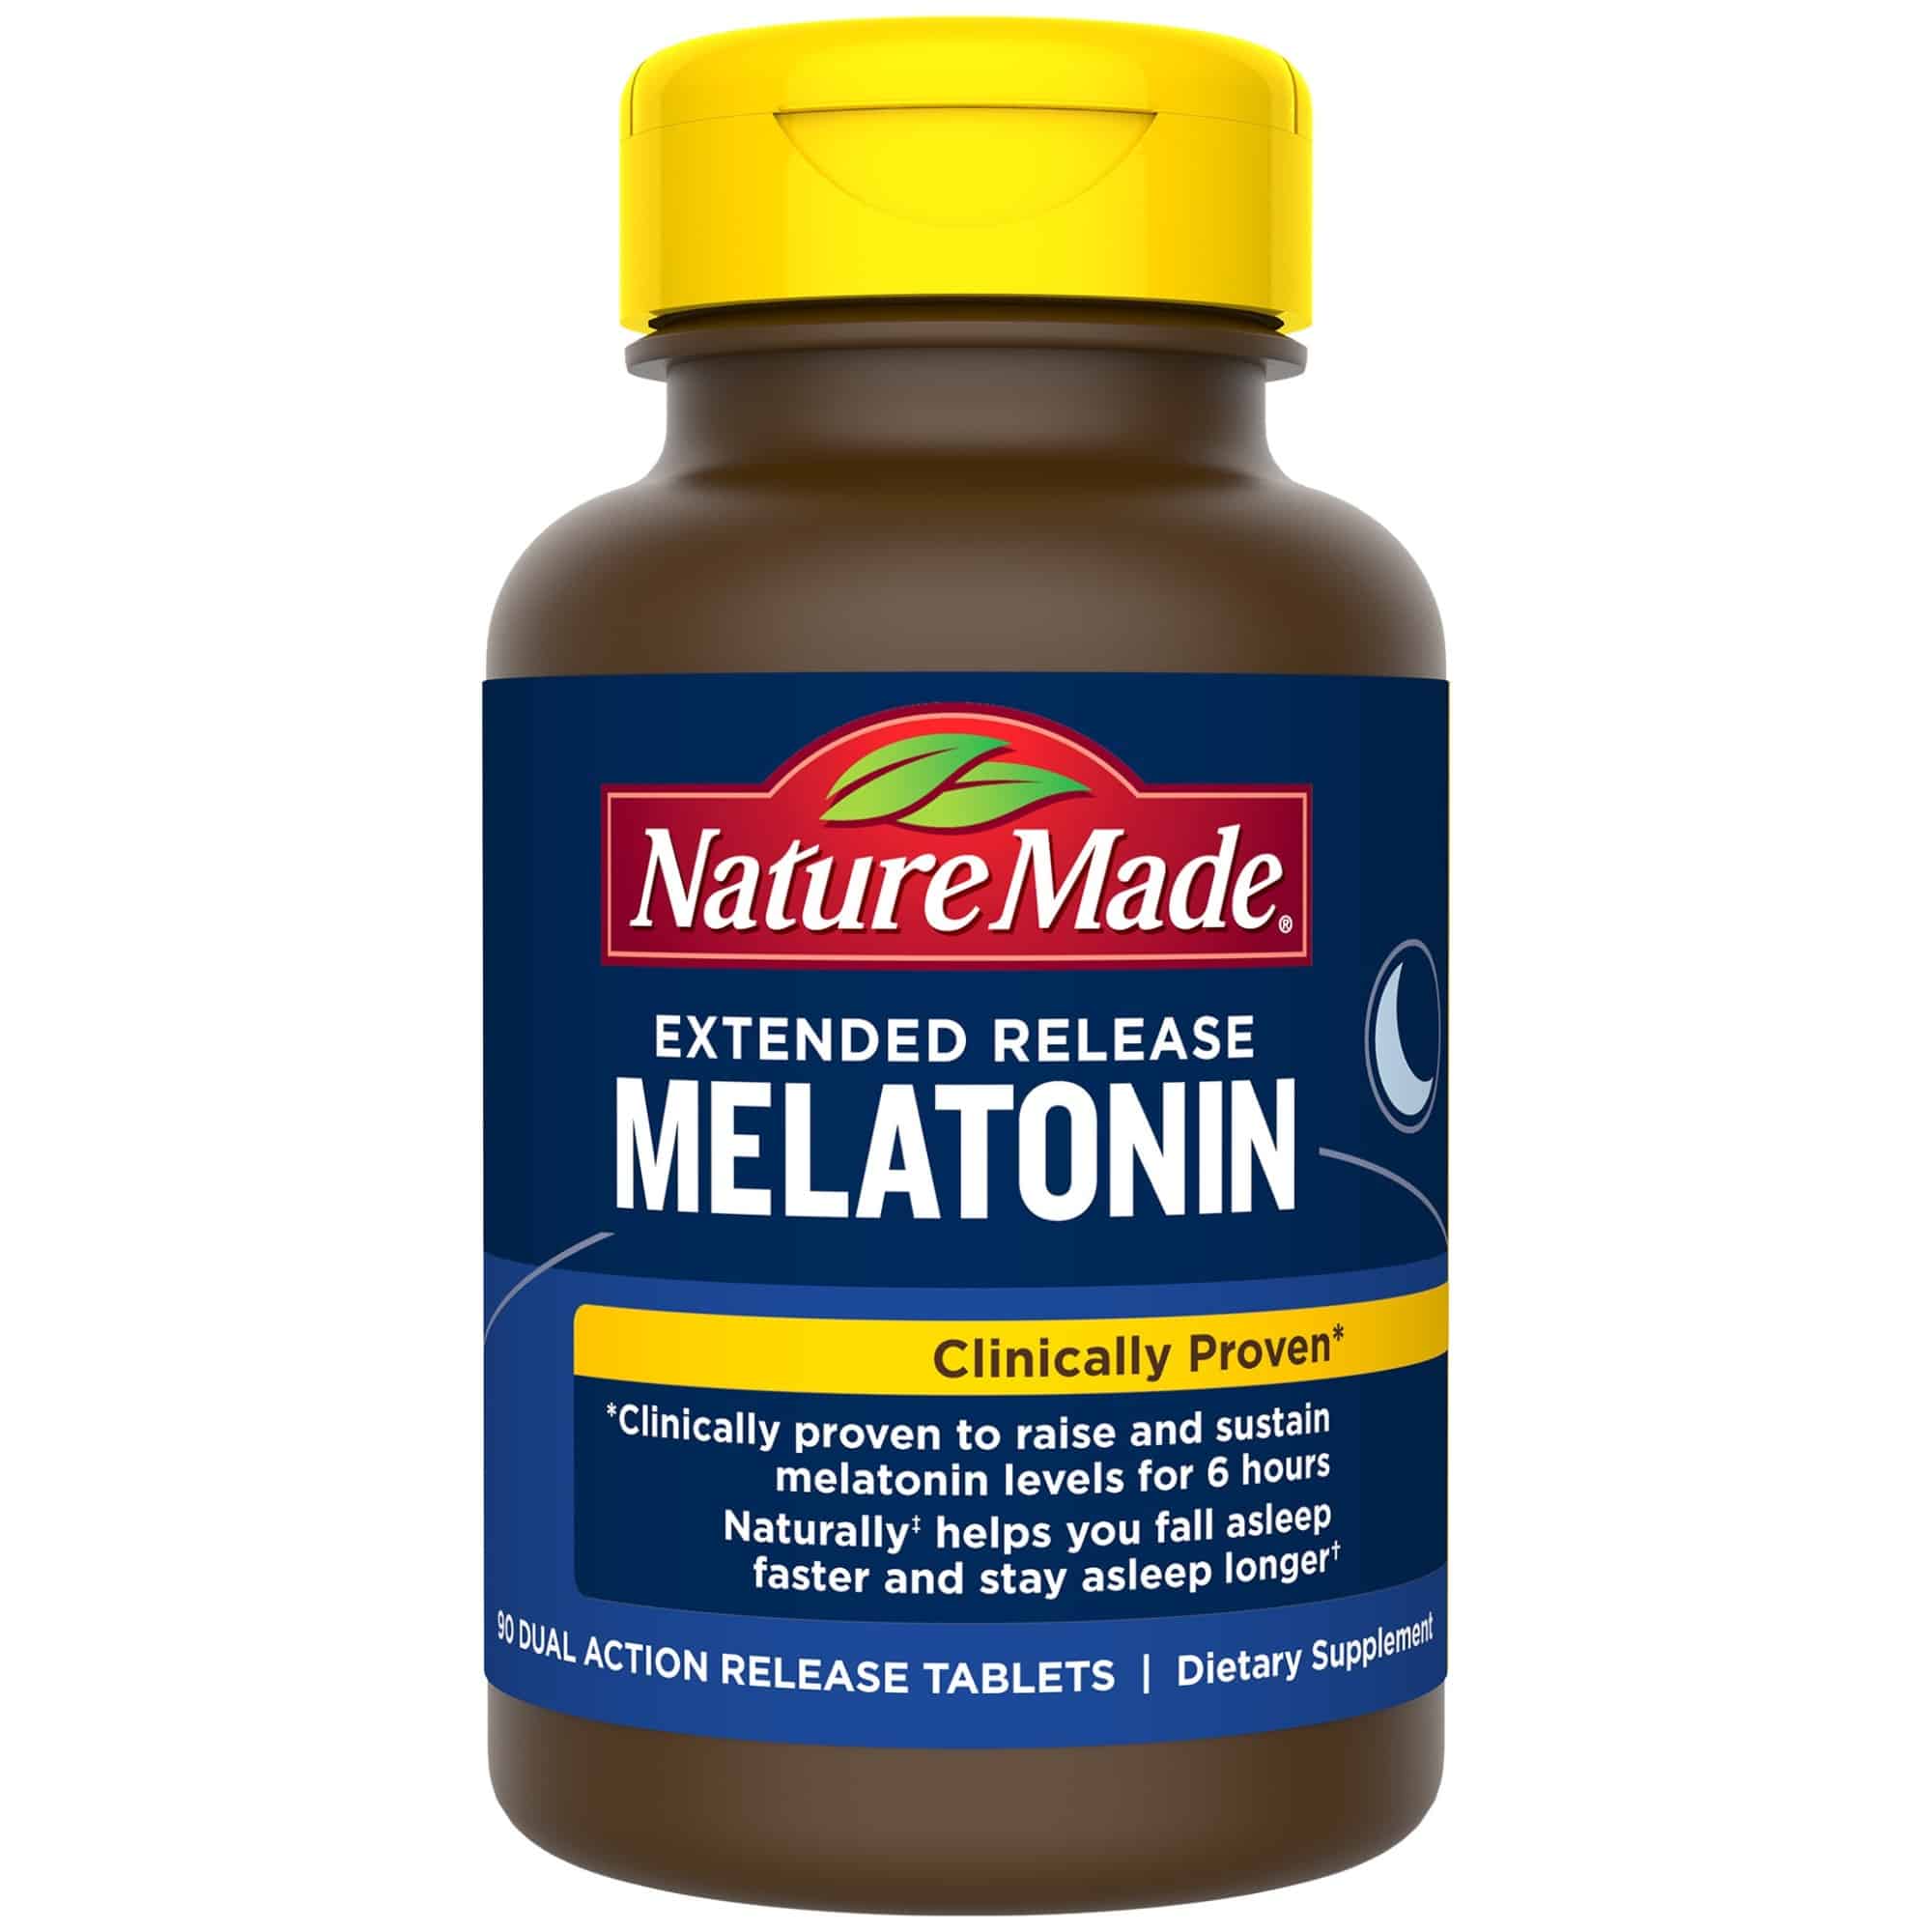 Nature Made Melatonin Extended Release Tablets, 90 Count